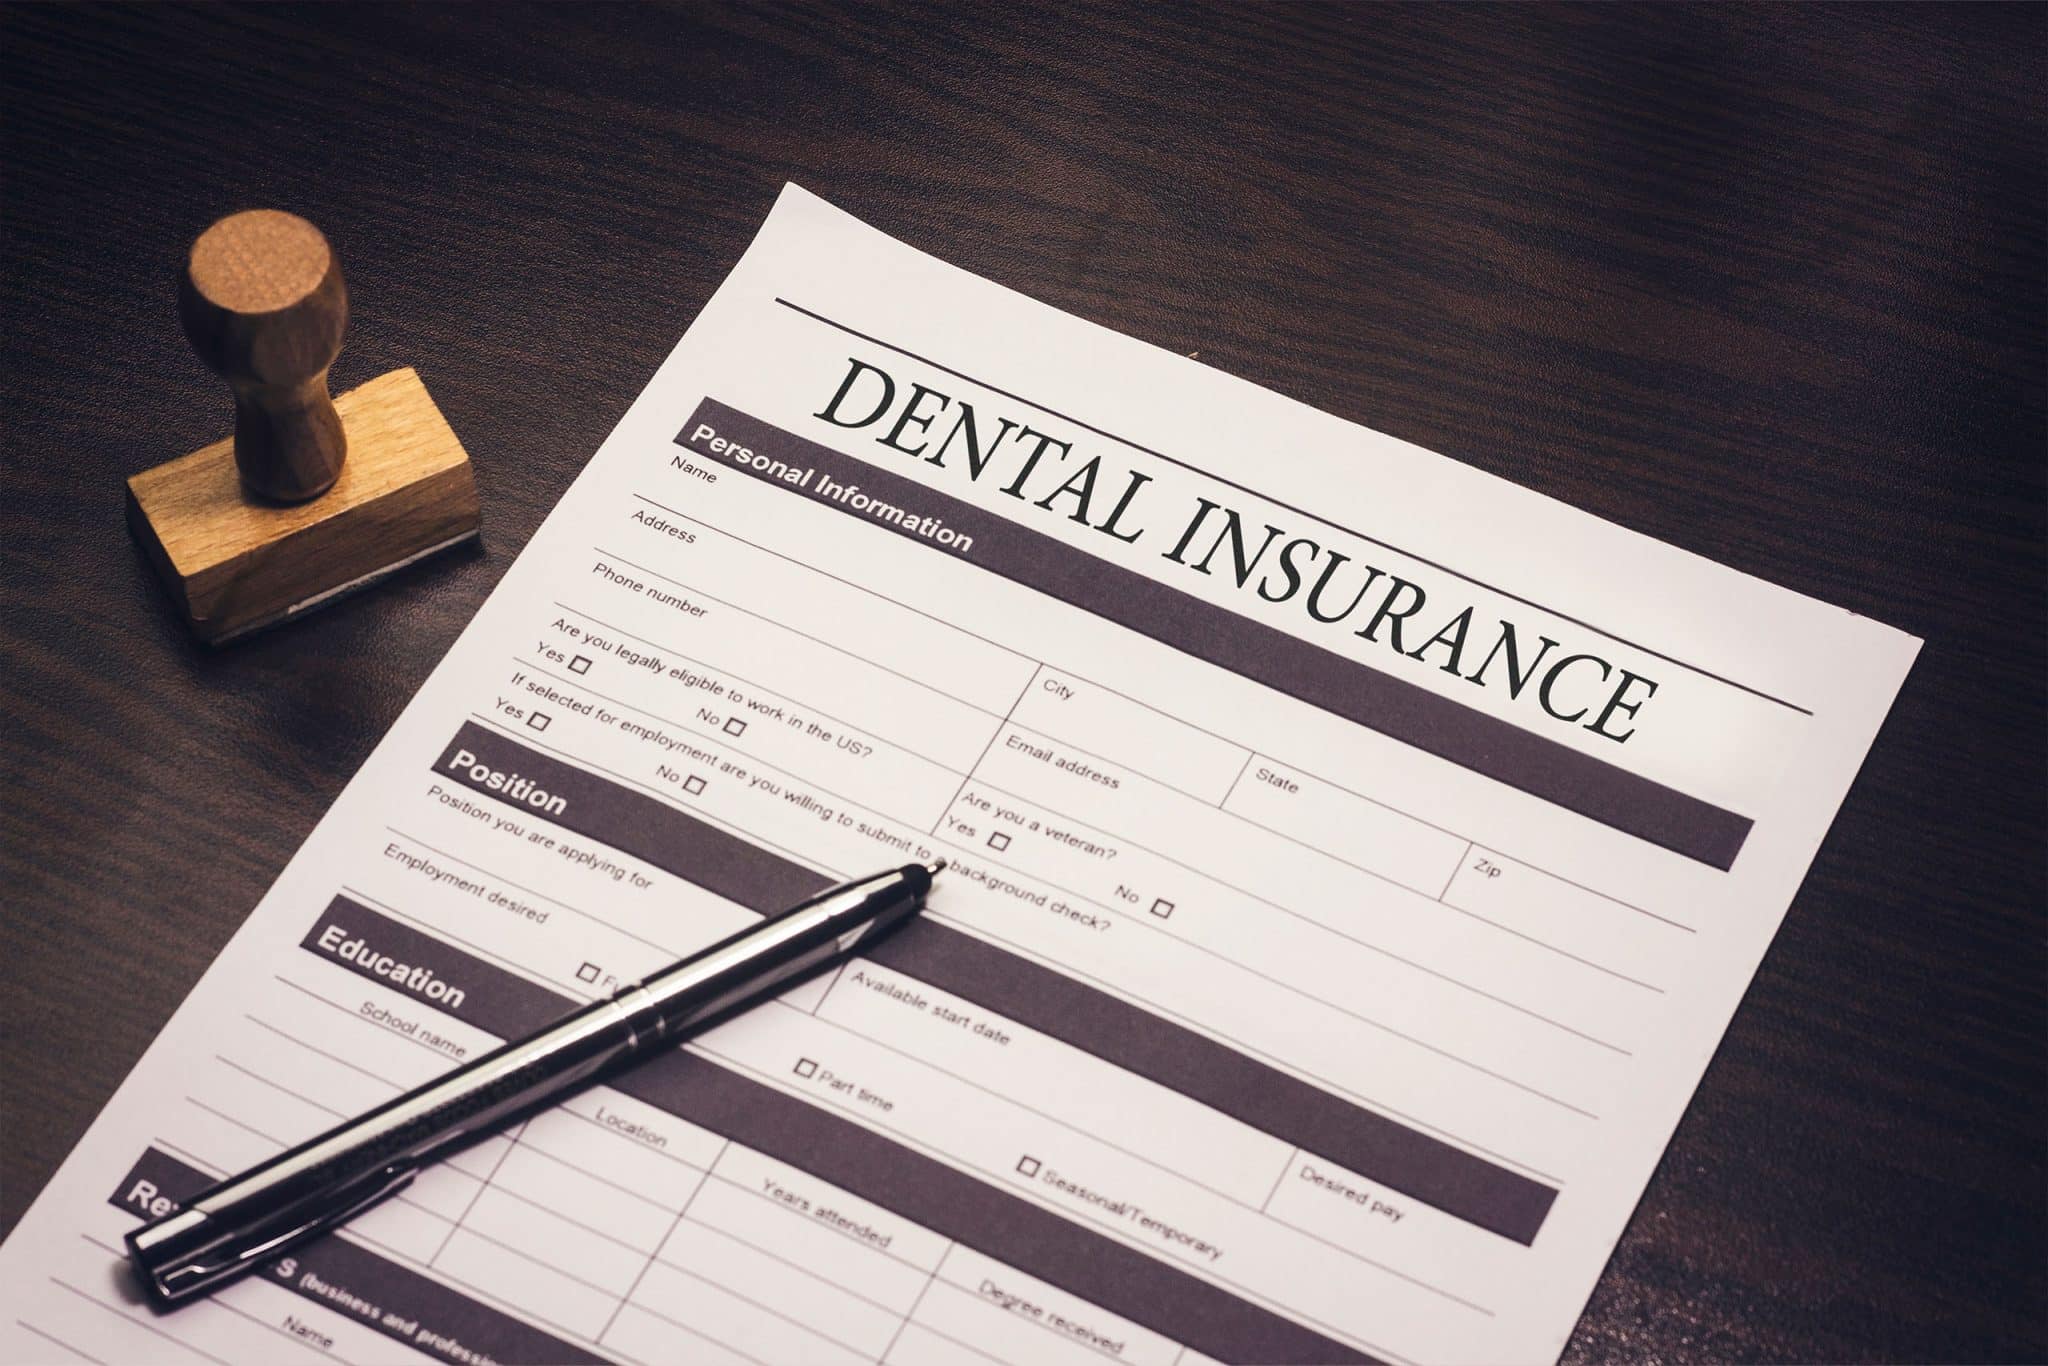 An image of a dental insurance form with a pen